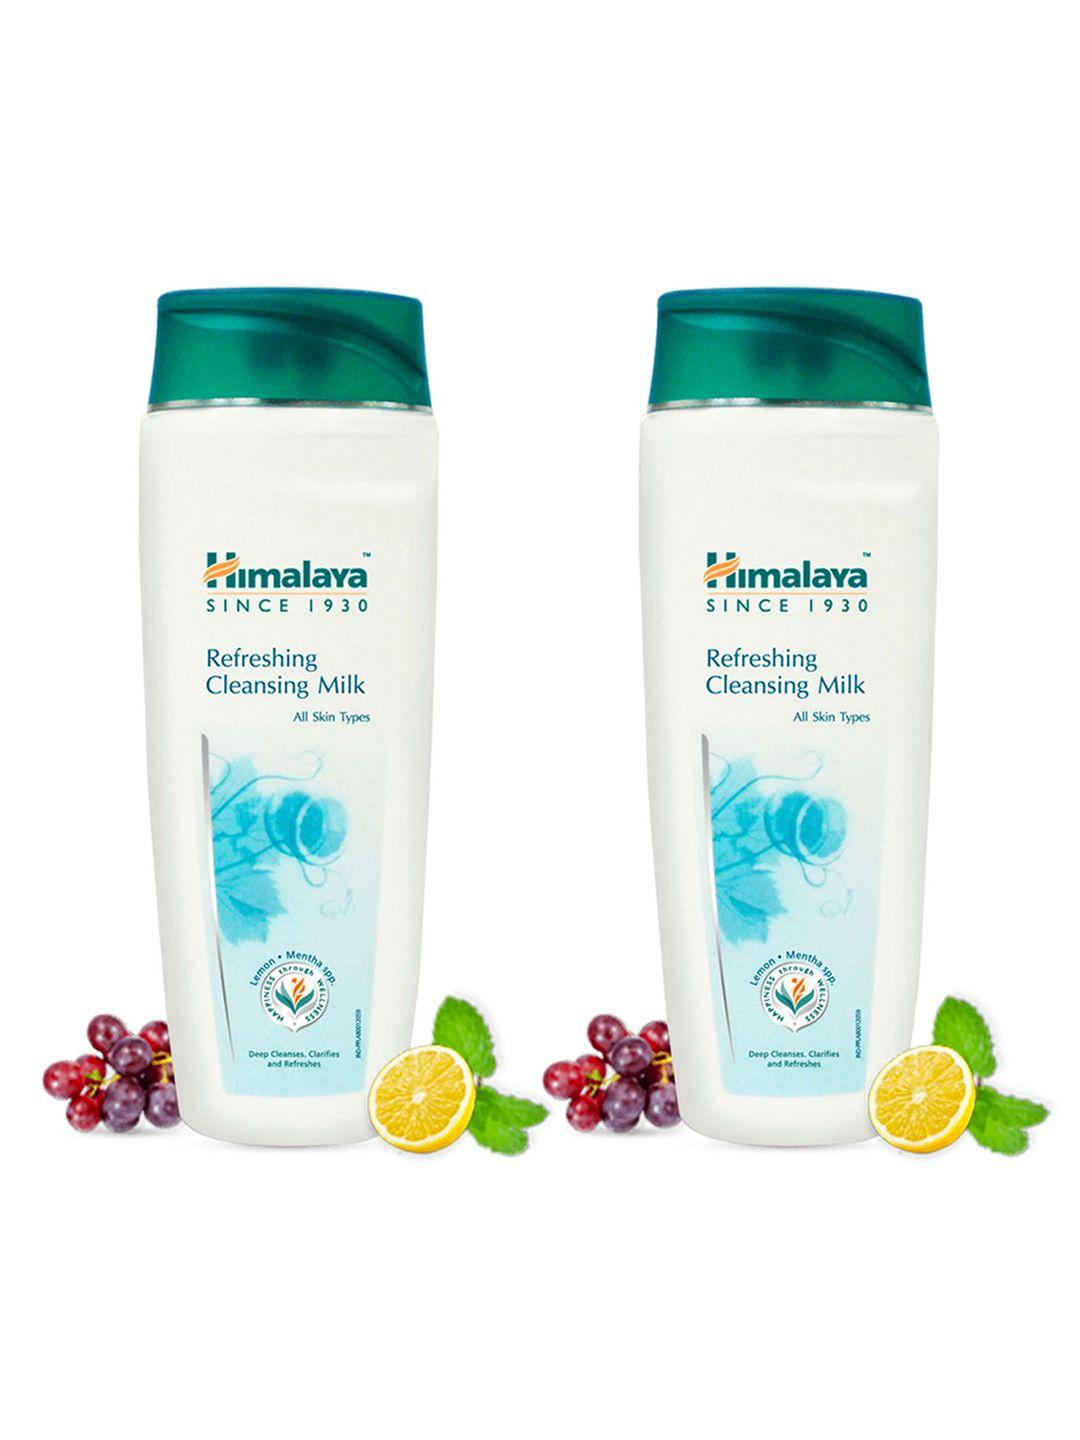 himalaya set of 2 refreshing cleansing milk with lemon & mint extracts - 100ml each